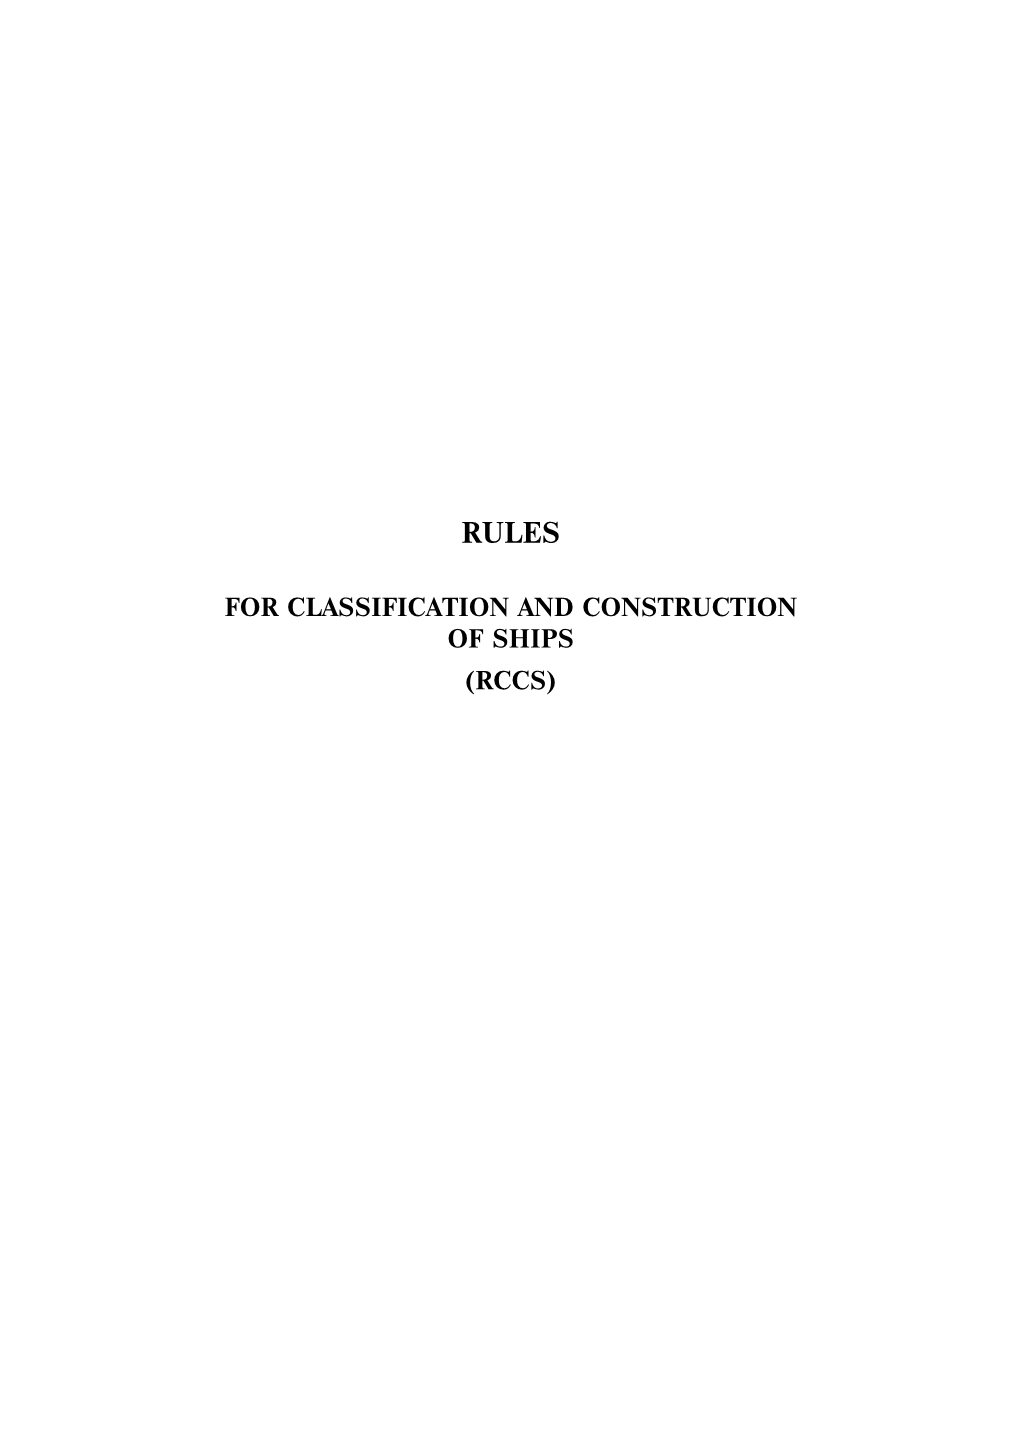 For Classification and Construction of Ships (Rccs)